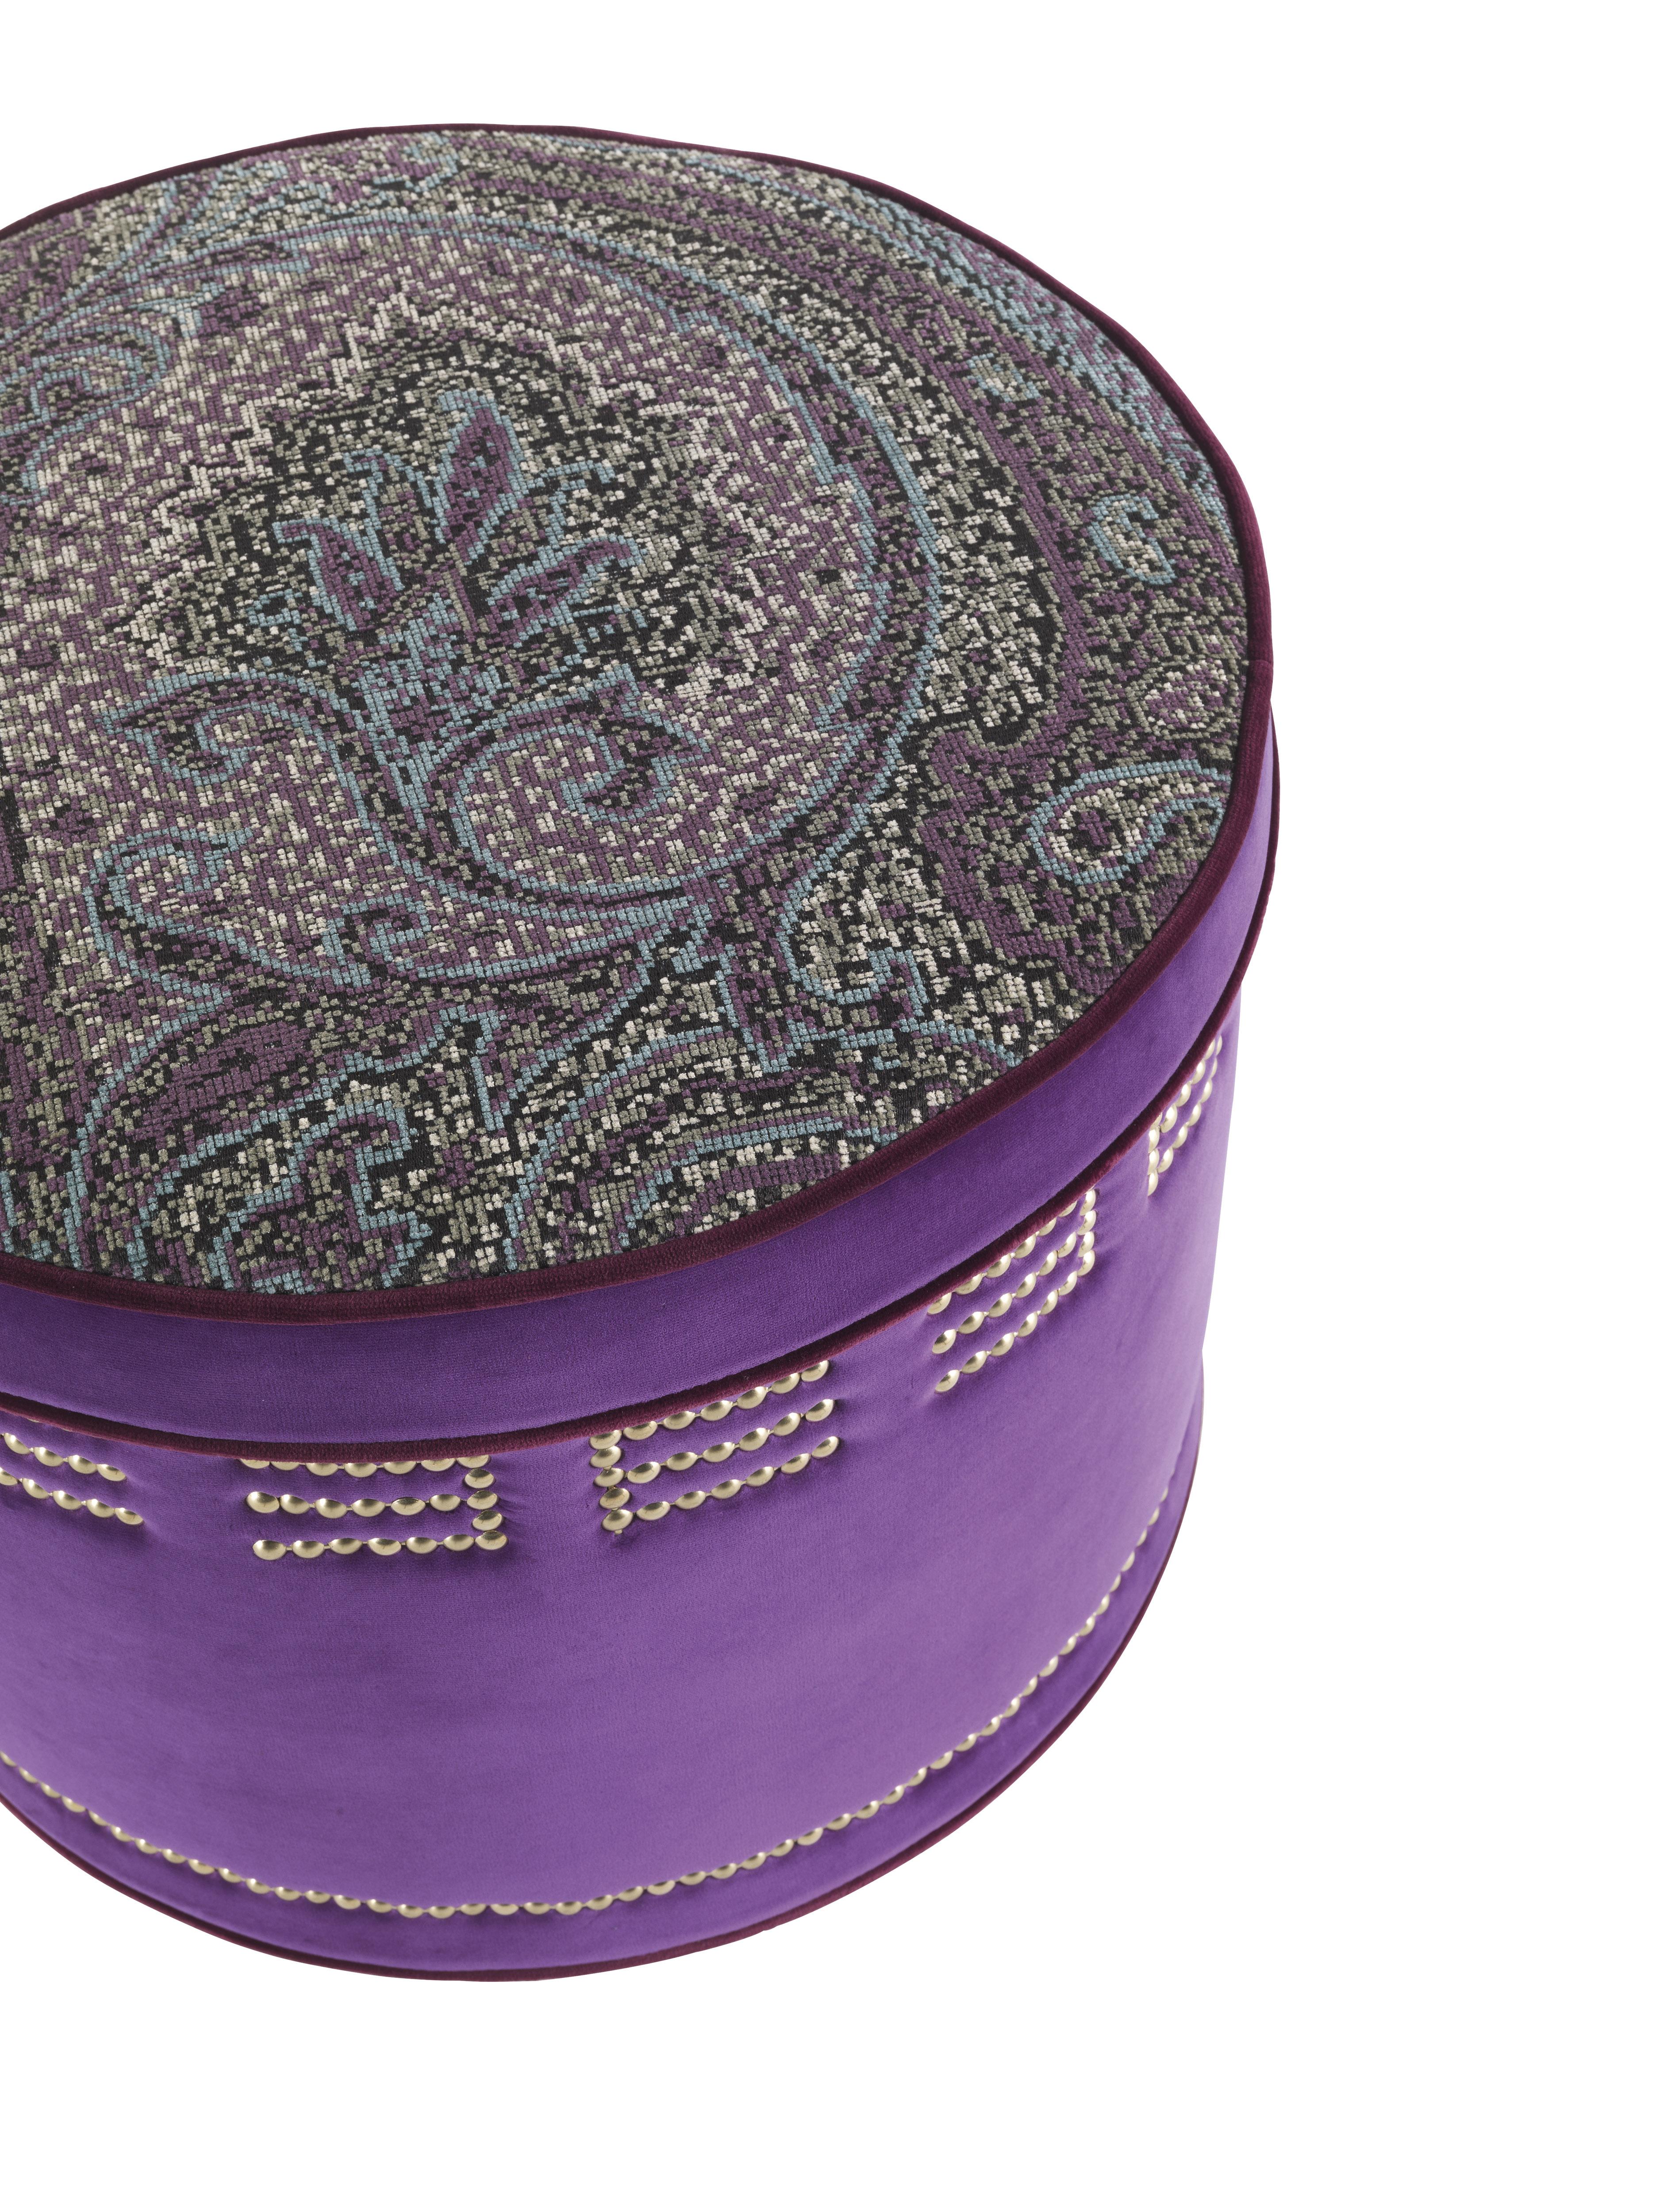 MERIAM pouf with Structure in wood and foam. Sides in velvet cat. A Venezia col. 2 Violet. Seat in fabric cat. A Rakam col. 1 Vicia. Piping in velvet cat. A Firenze col. 1 Raisin. Ornamental golden nails on the bottom. Optional decoration with Etro